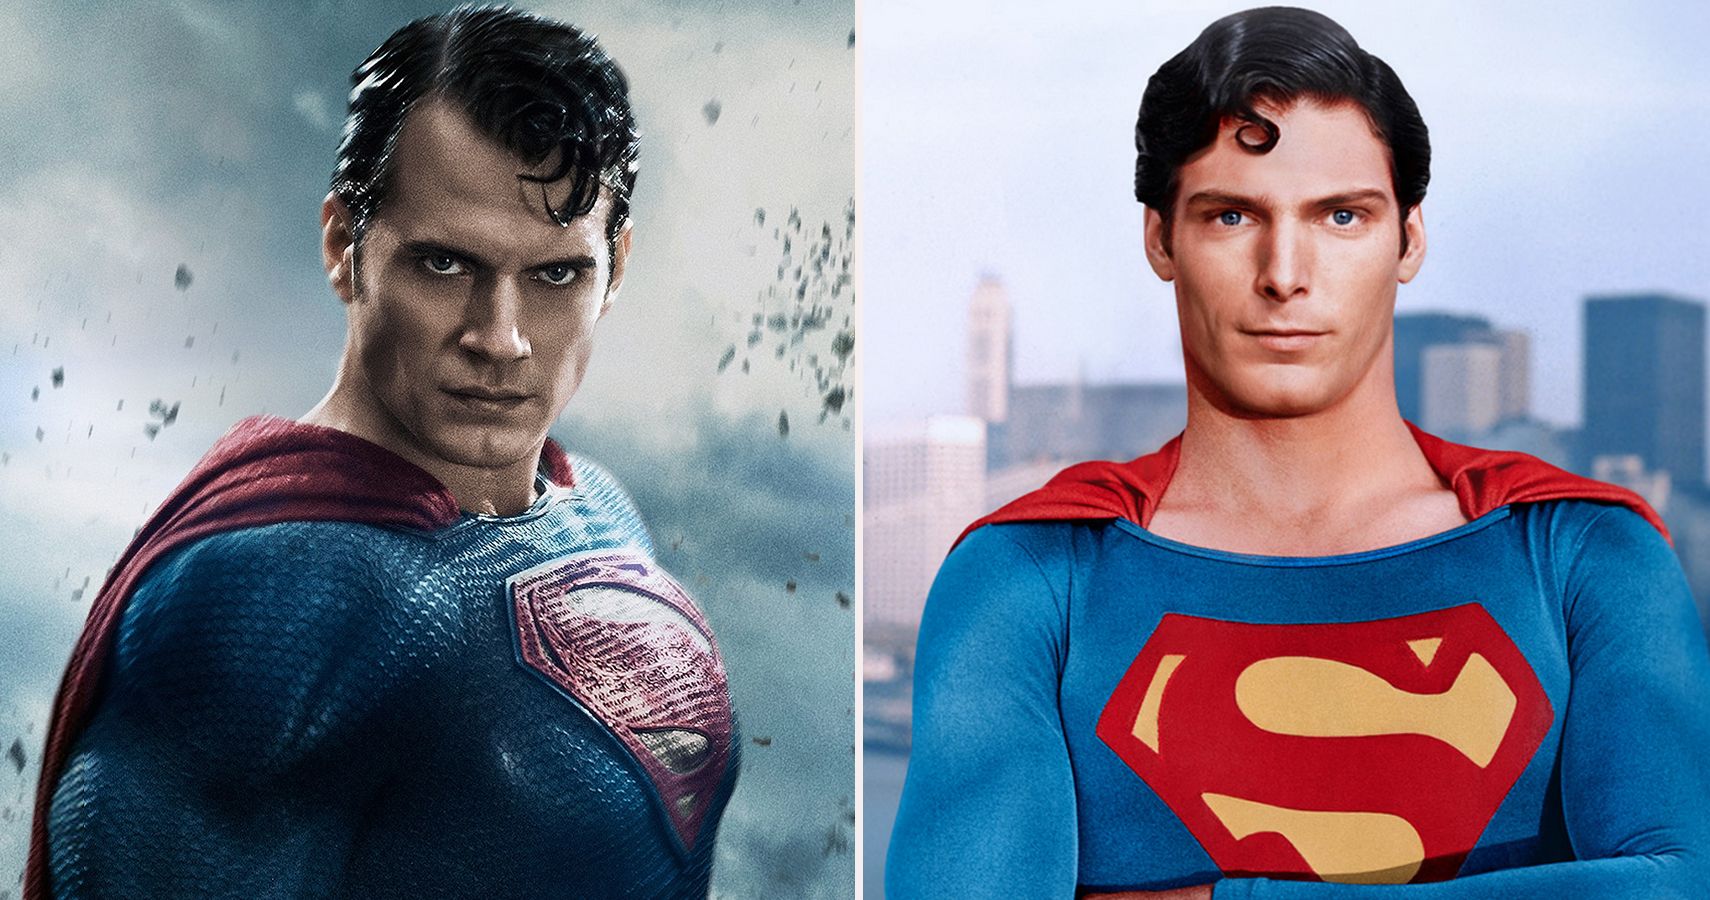 New Photo of Henry Cavill in Christopher Reeve Costume - Superman Homepage